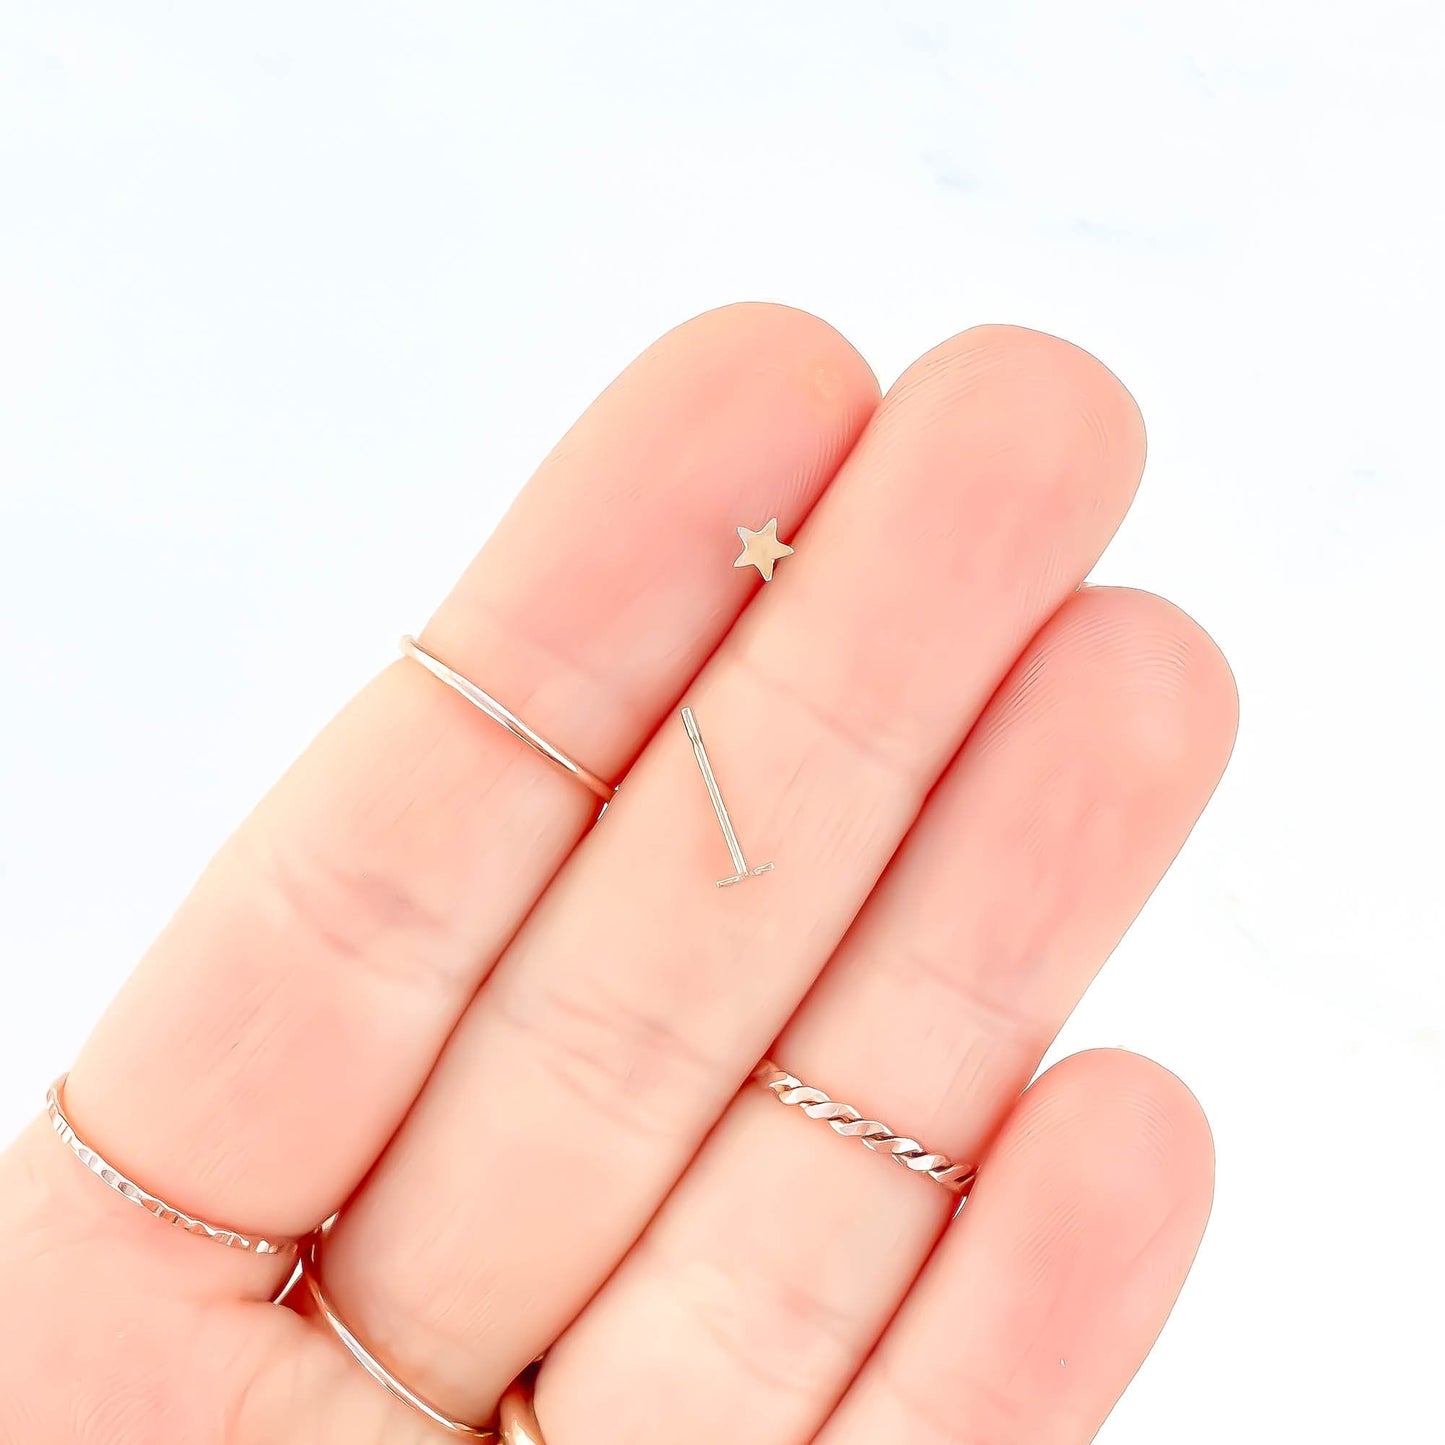 Star, Crescent, Circle, OR Square Studs, Single or Pair